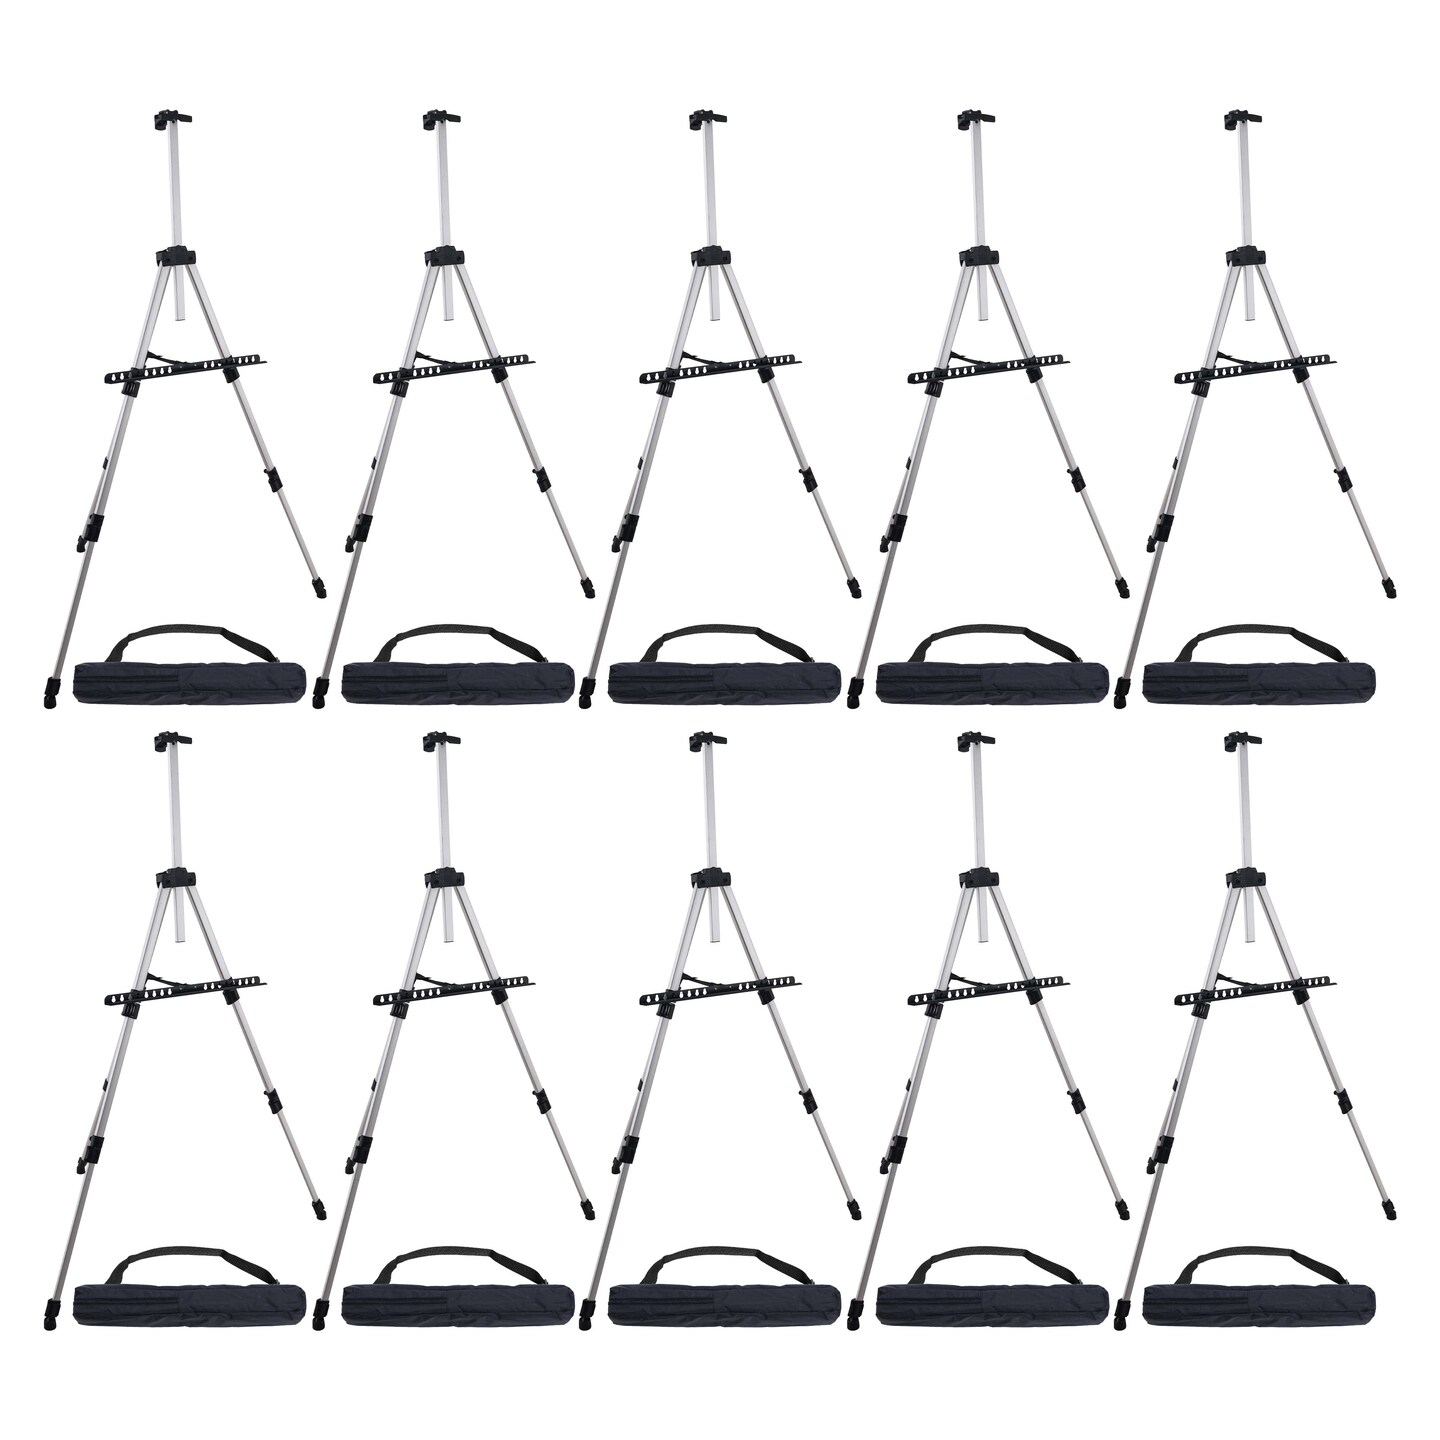 66 Sturdy Silver Aluminum Tripod Artist Field and Display Easel Stand, 10  Pack - Adjustable Height 20 to 5.5 Feet, Holds 32 Canvas - Floor Tabletop